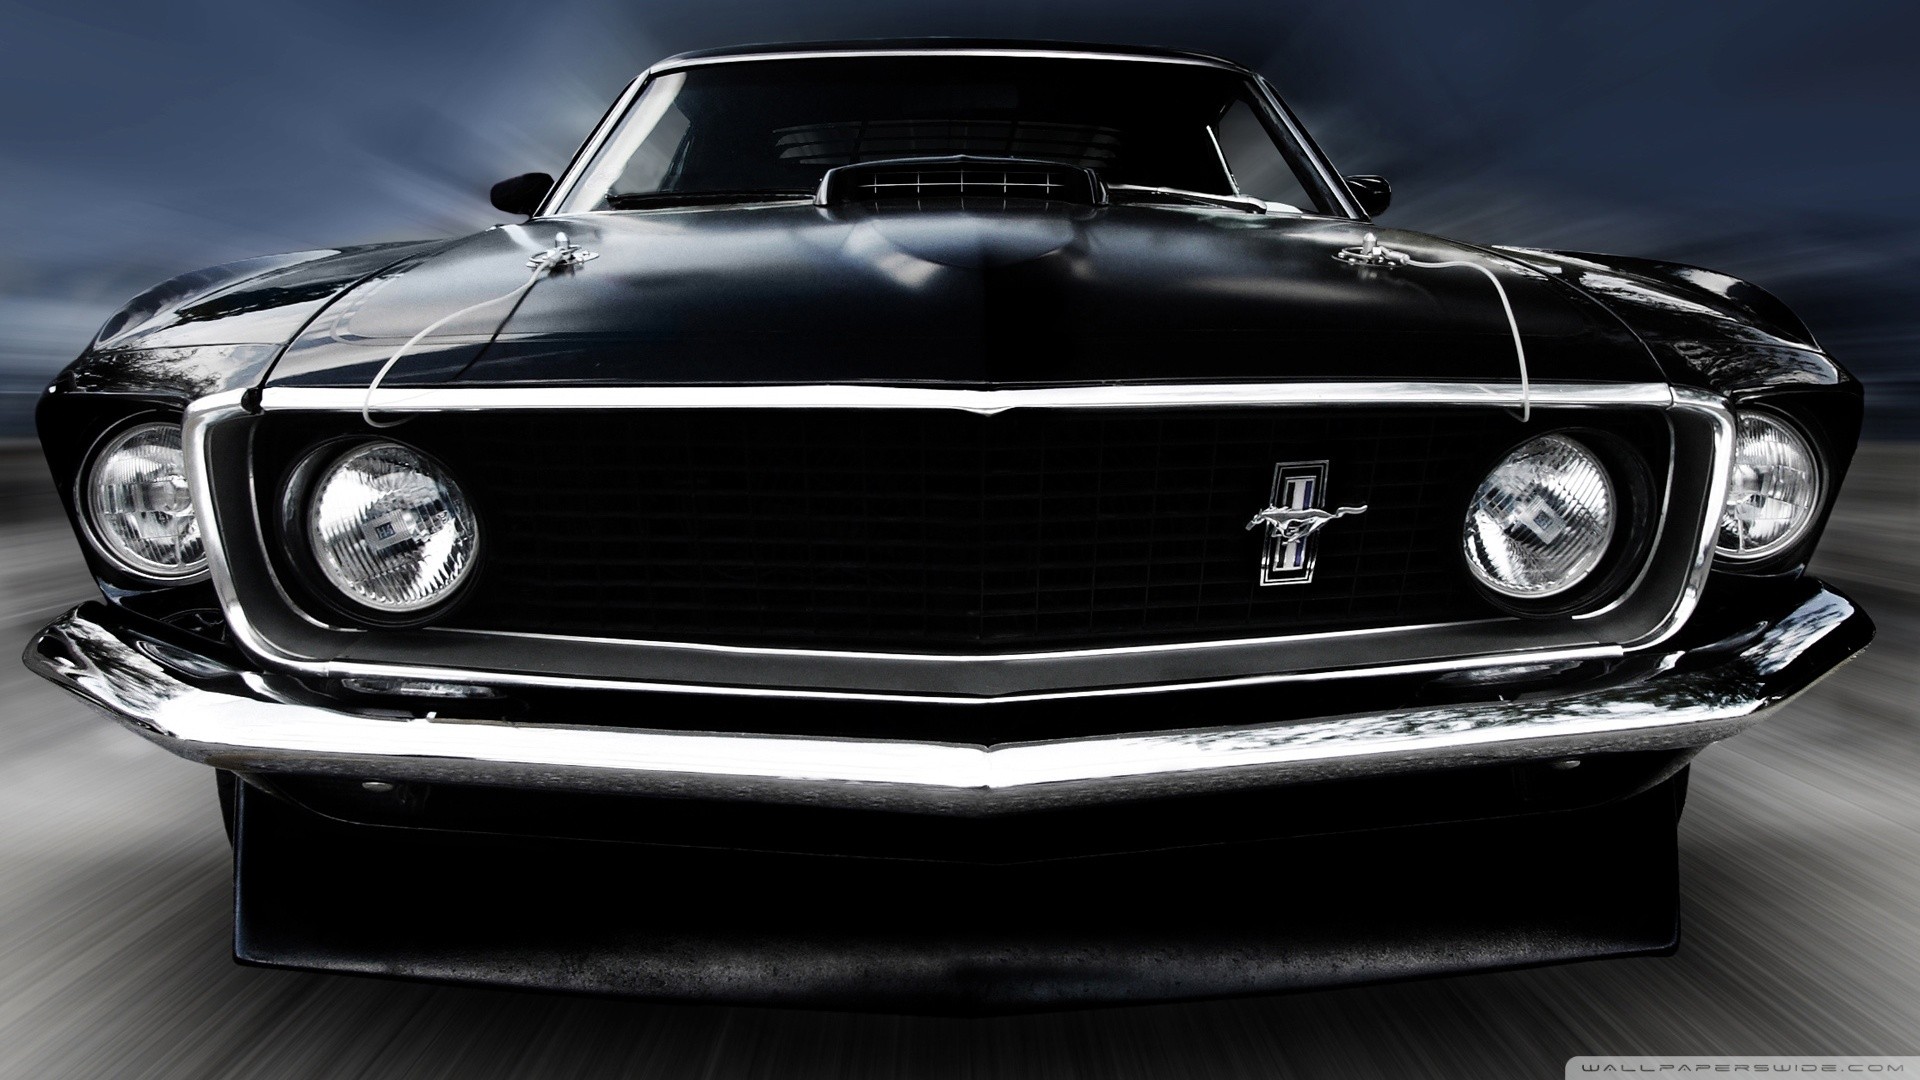 General 1920x1080 car vehicle black cars Ford Ford Mustang muscle cars American cars